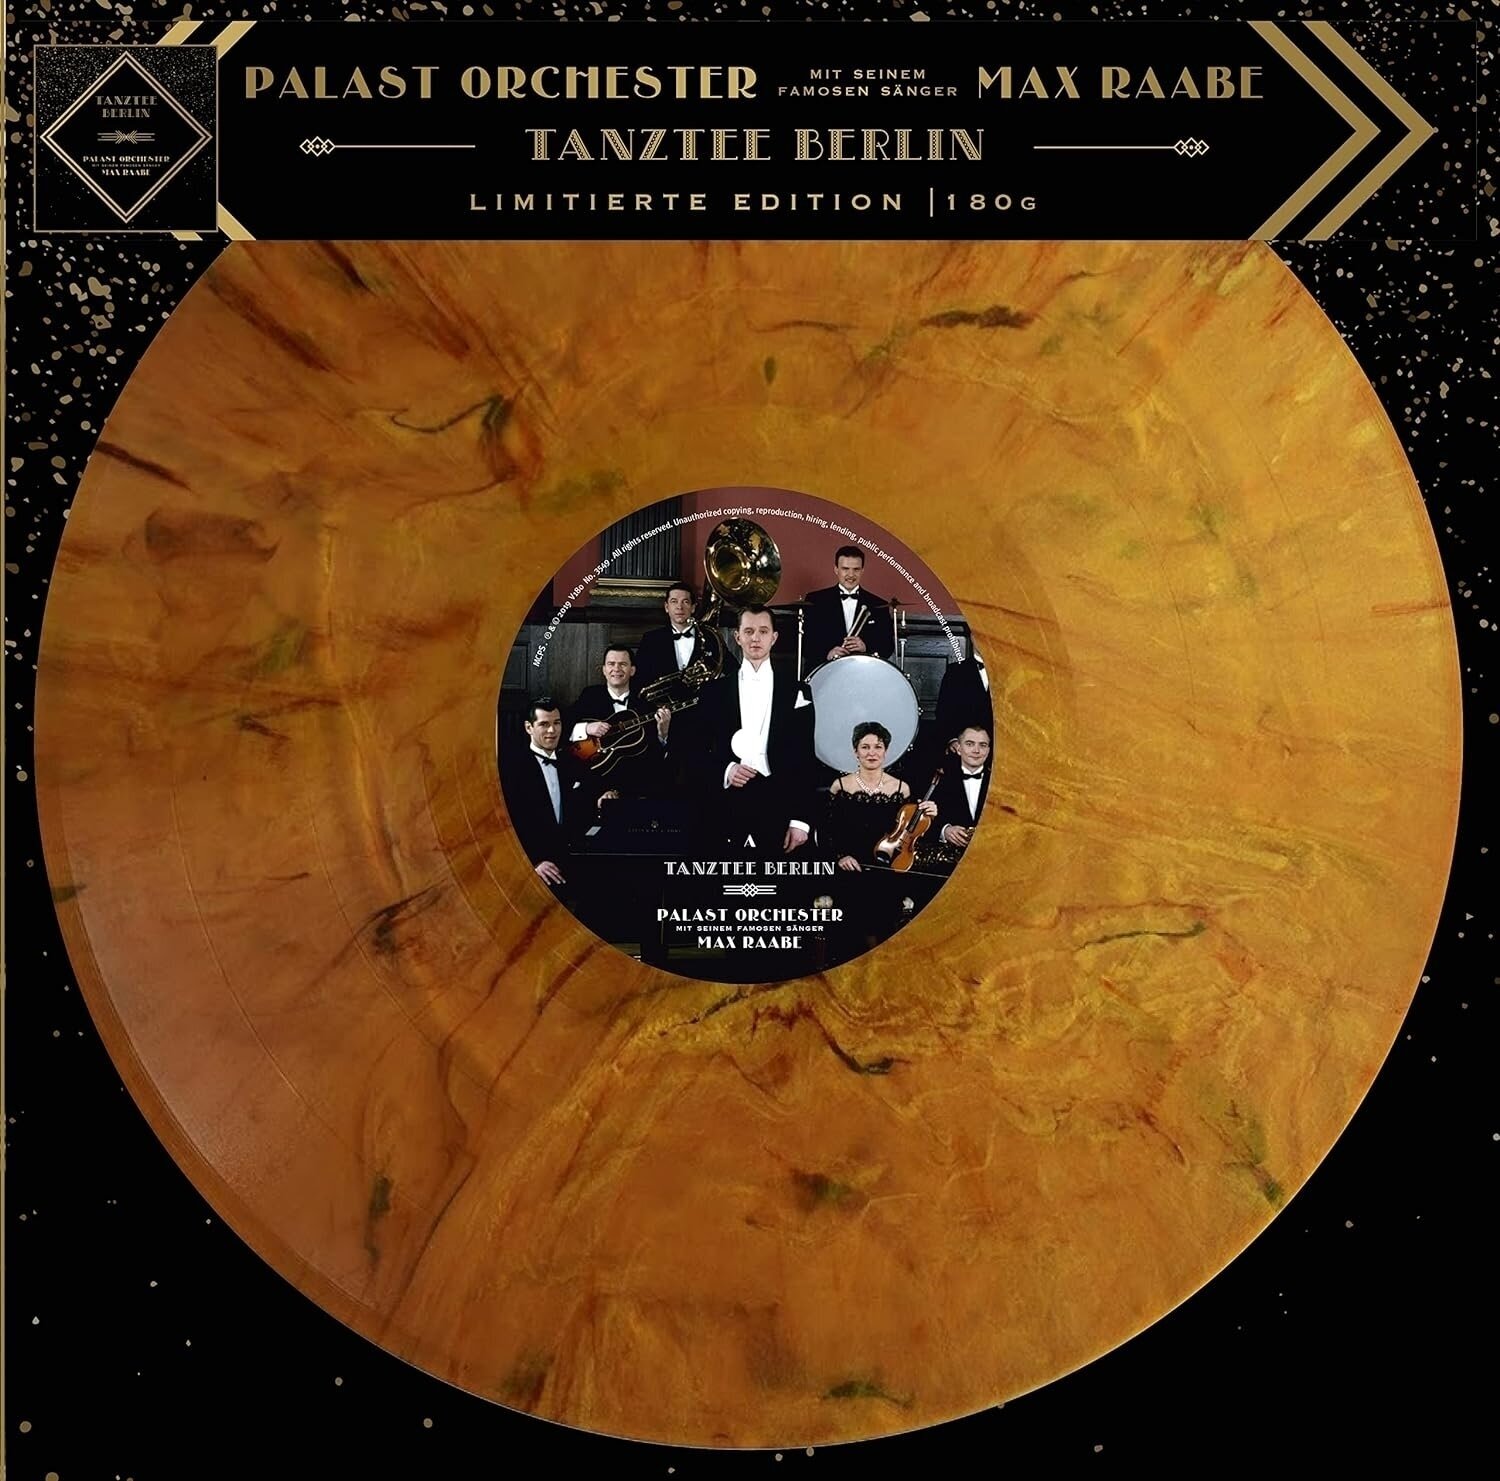 Vinyl Record Palast Orchester - Tanztee Berlin (Limited Edition) (Golden Yellow Marbled Coloured) (LP)